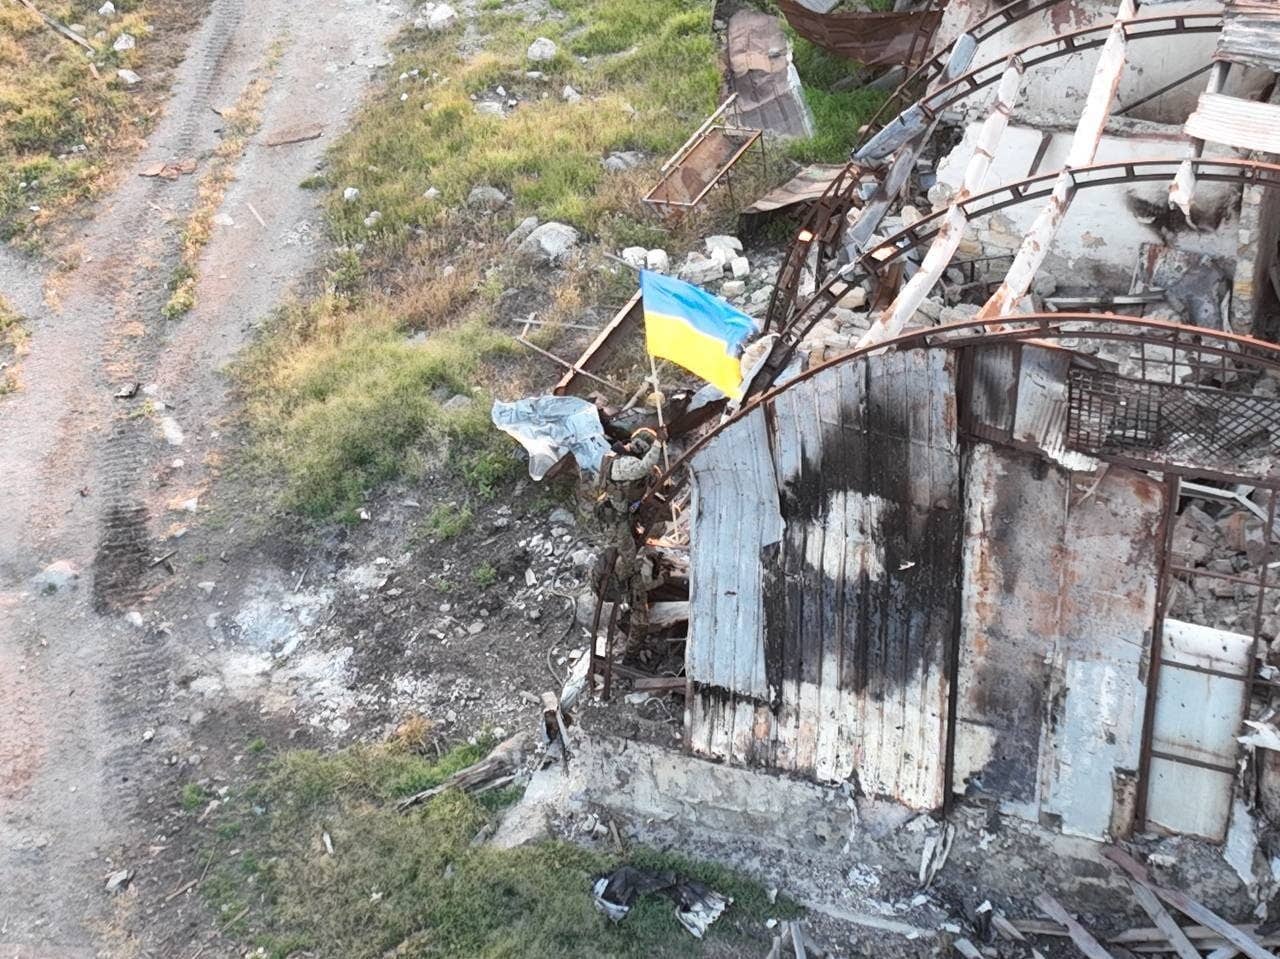 Ukrainian troops raised their flag on Snake Island, where battle damage after multiple bombardments by both sides is evident. Via Telegram